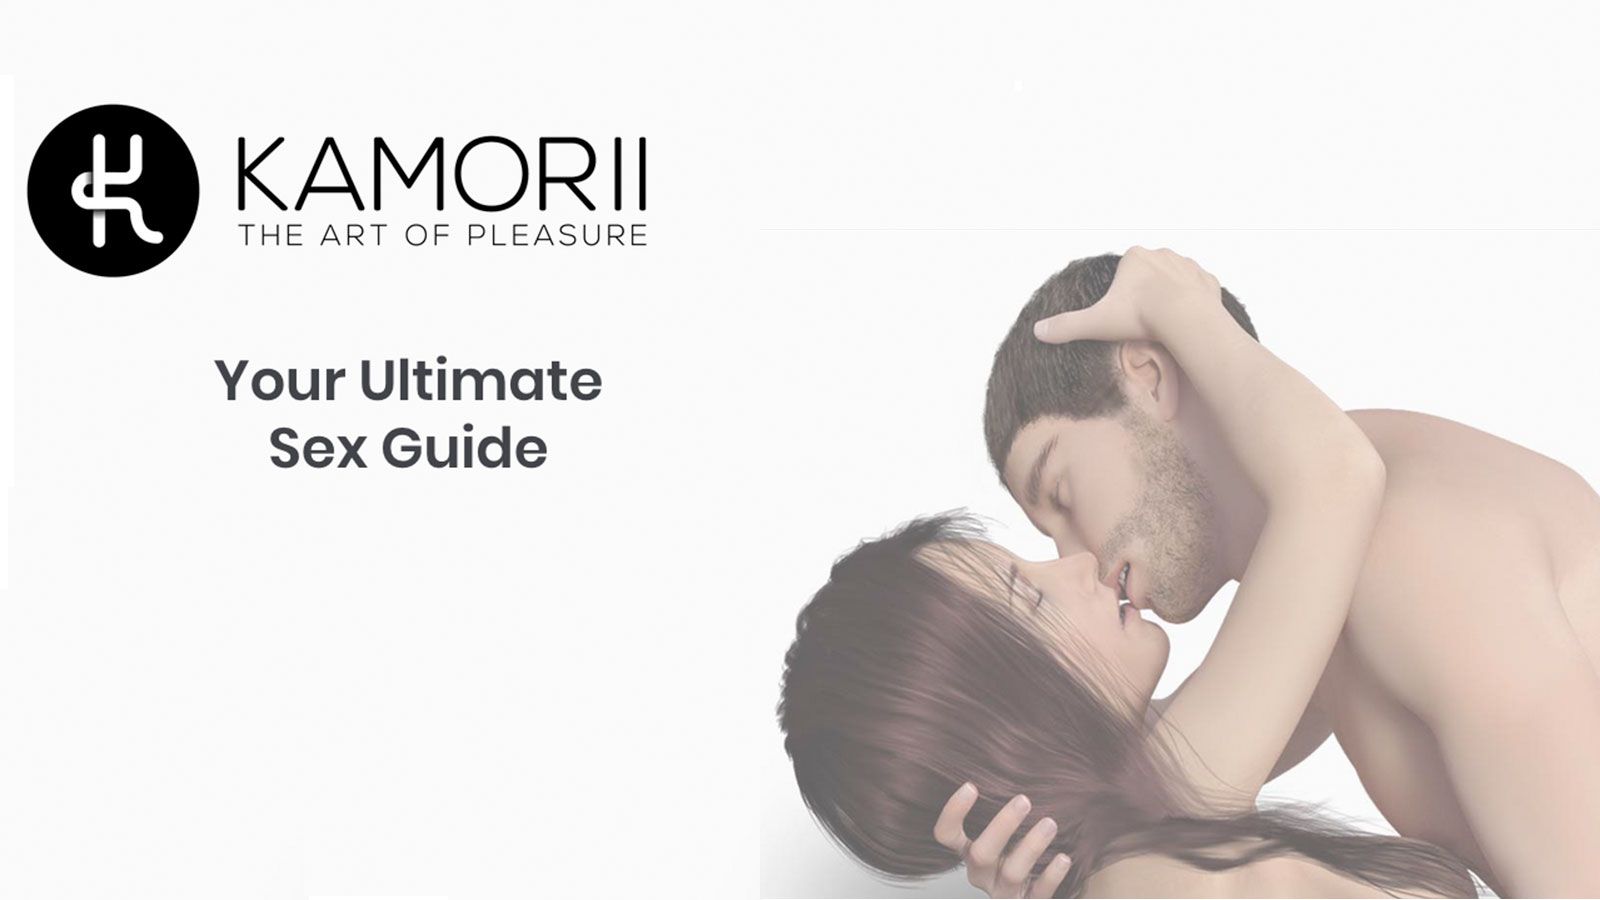 Kamorii Claims Web's 1st Complete Guide To Sex & Sexual Technique